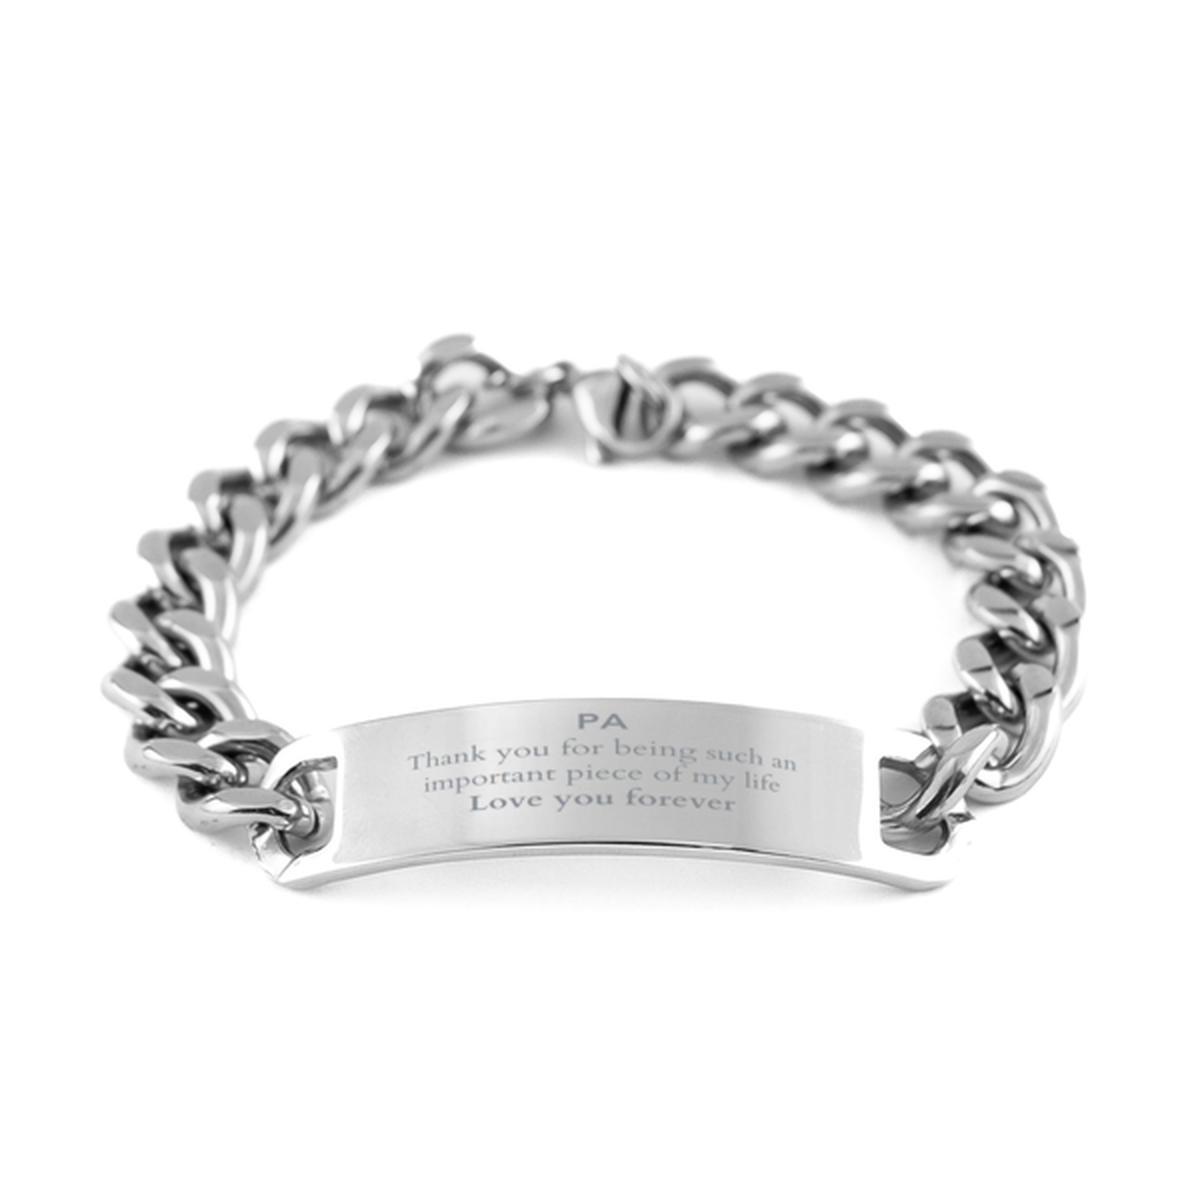 Appropriate Pa Cuban Chain Stainless Steel Bracelet Epic Birthday Gifts for Pa Thank you for being such an important piece of my life Pa Christmas Mothers Fathers Day